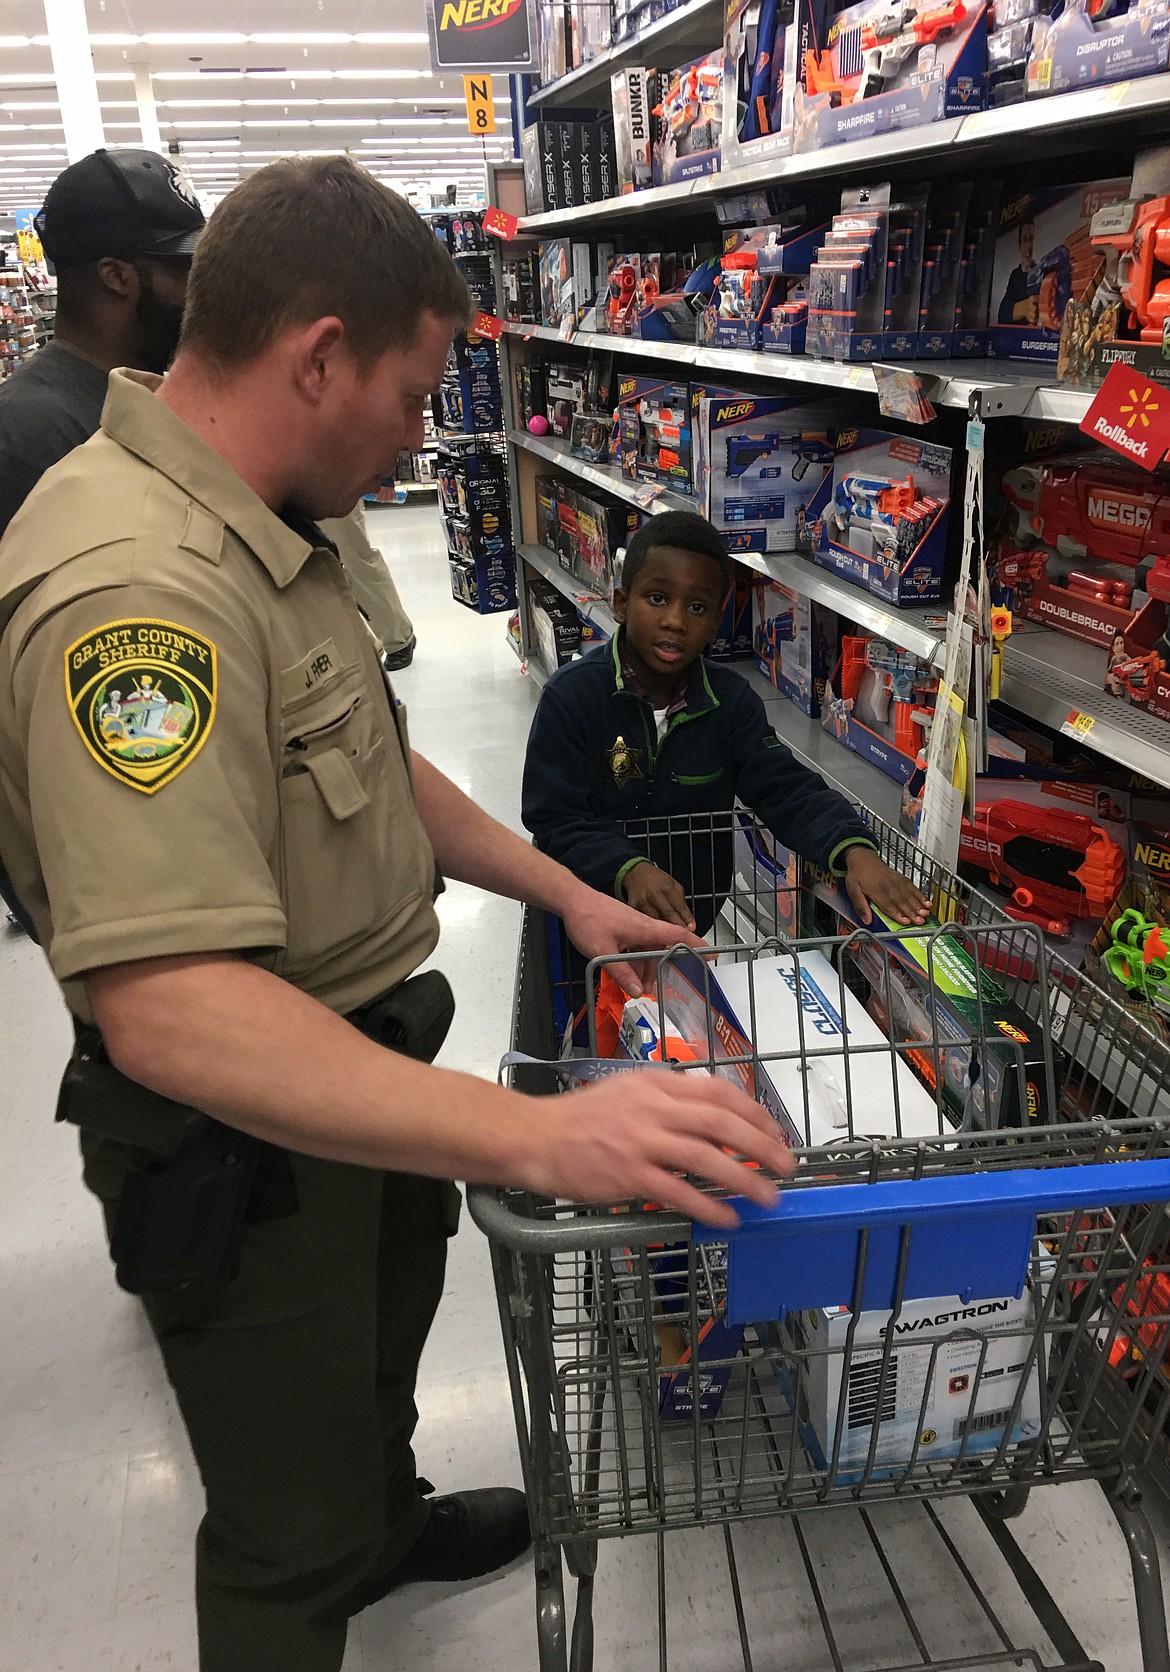 Grant County Sheriff’s Deputy Jake Fisher discusses the finer points of Nerf weaponry with 7-year-old Ocie Richie of Moses Lake at last year’s Shop with a Cop event.